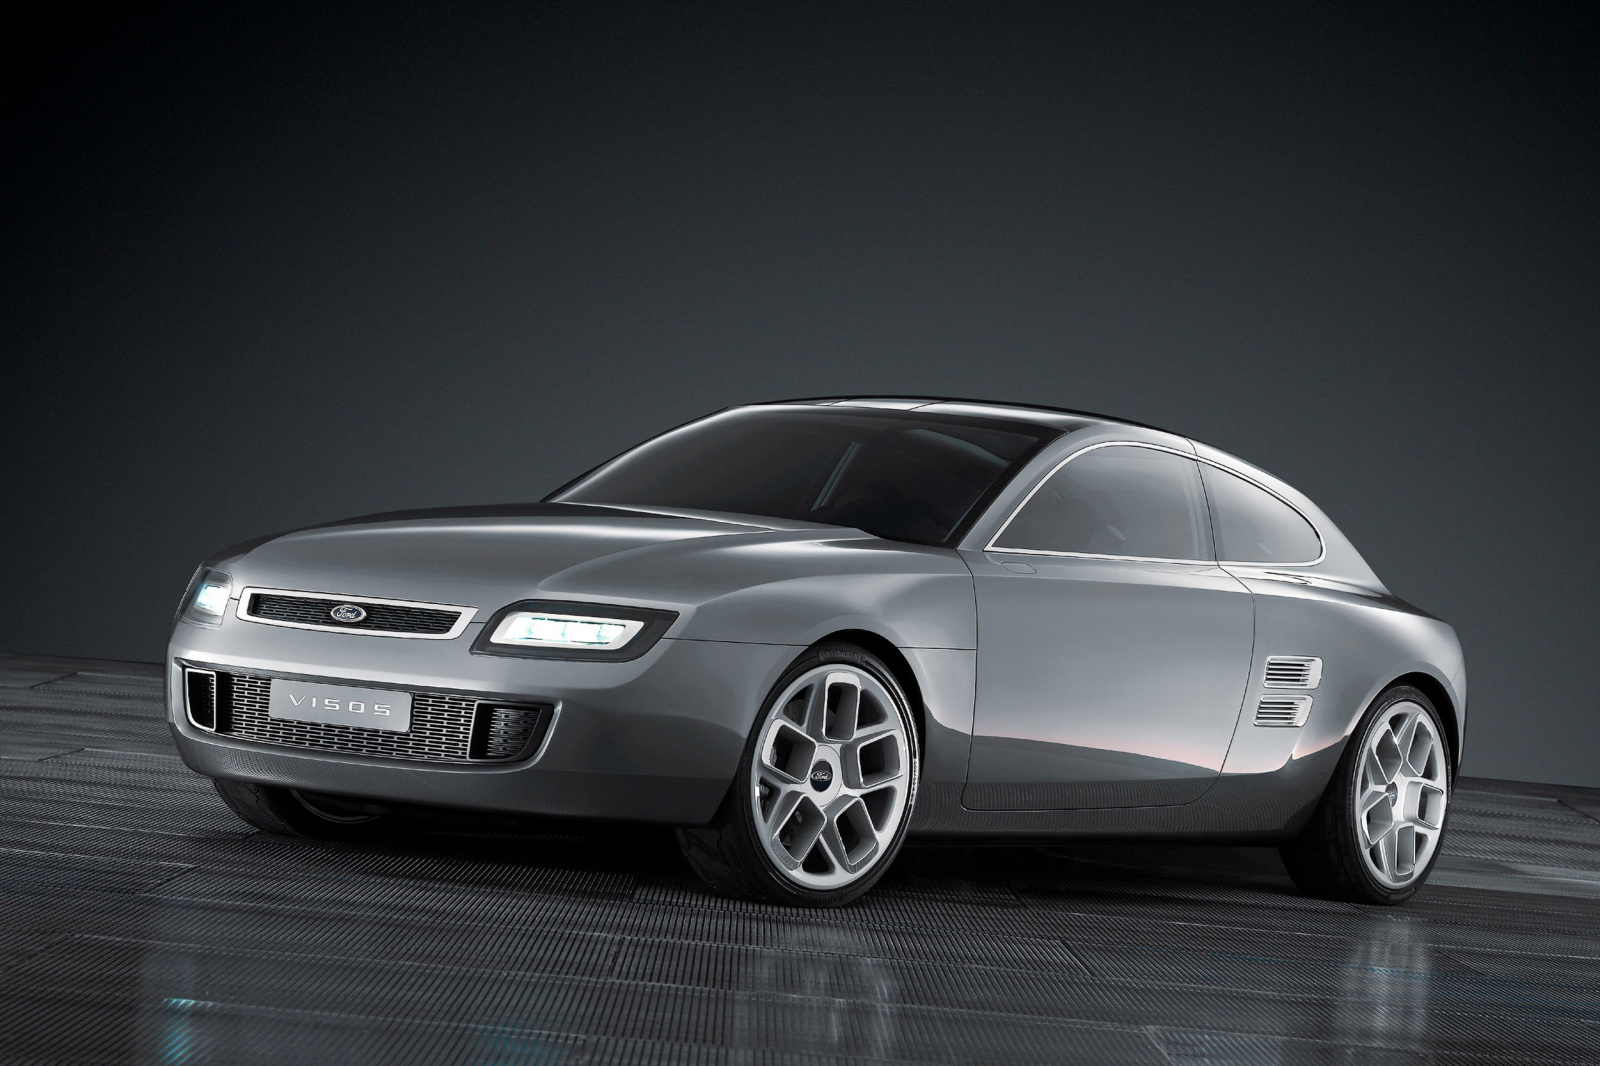 Ford Visos Concept - Foto eines Ford Concept-Cars